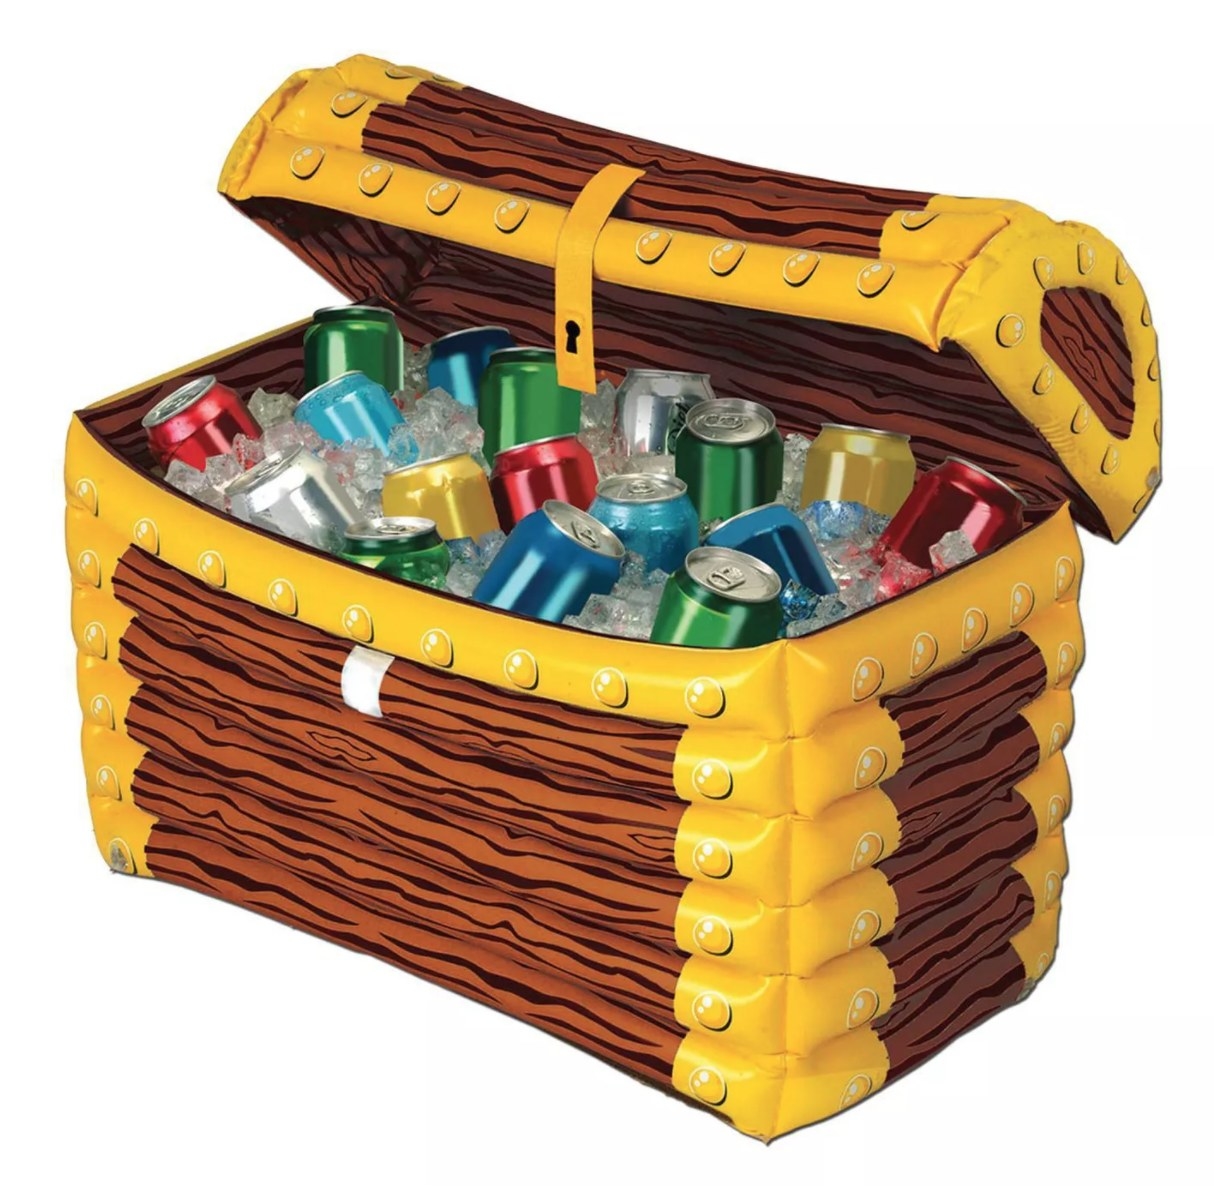 A blow-up ice chest that looks like a treasure chest